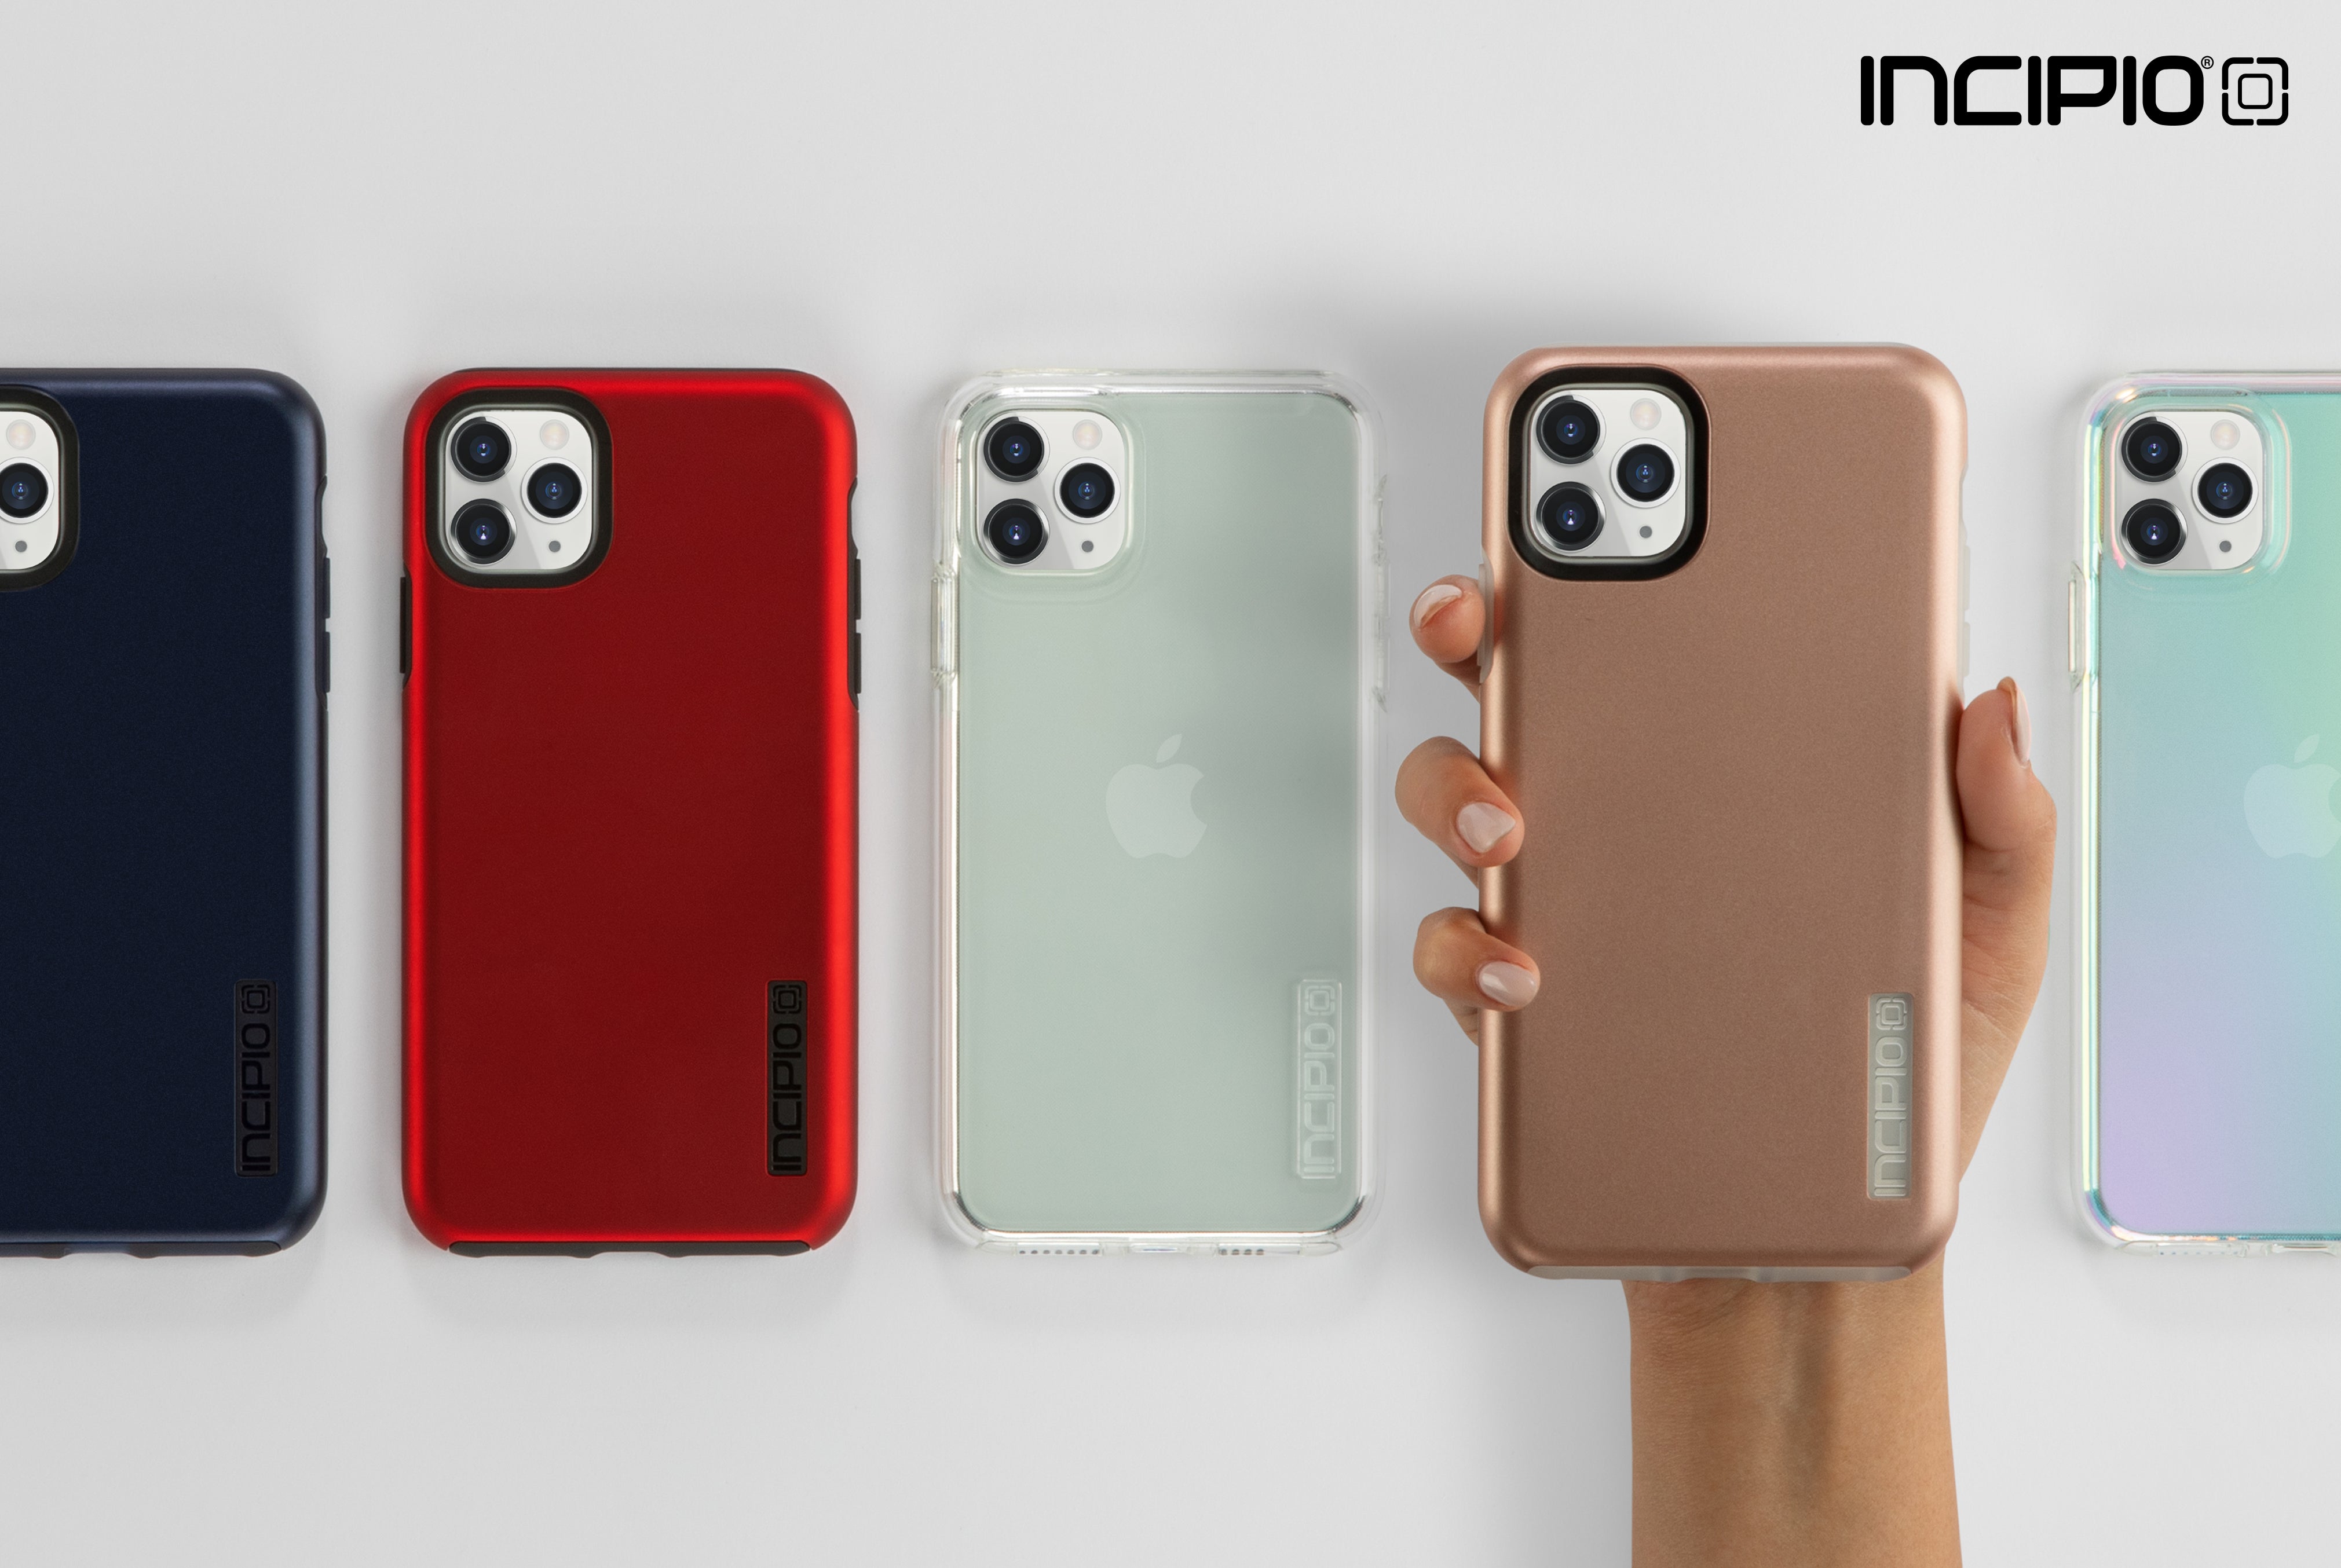 Incipio Launches Complete Range of Slim Protective Cases for iPhone 11, iPhone 11 Pro and iPhone 11 Pro Max